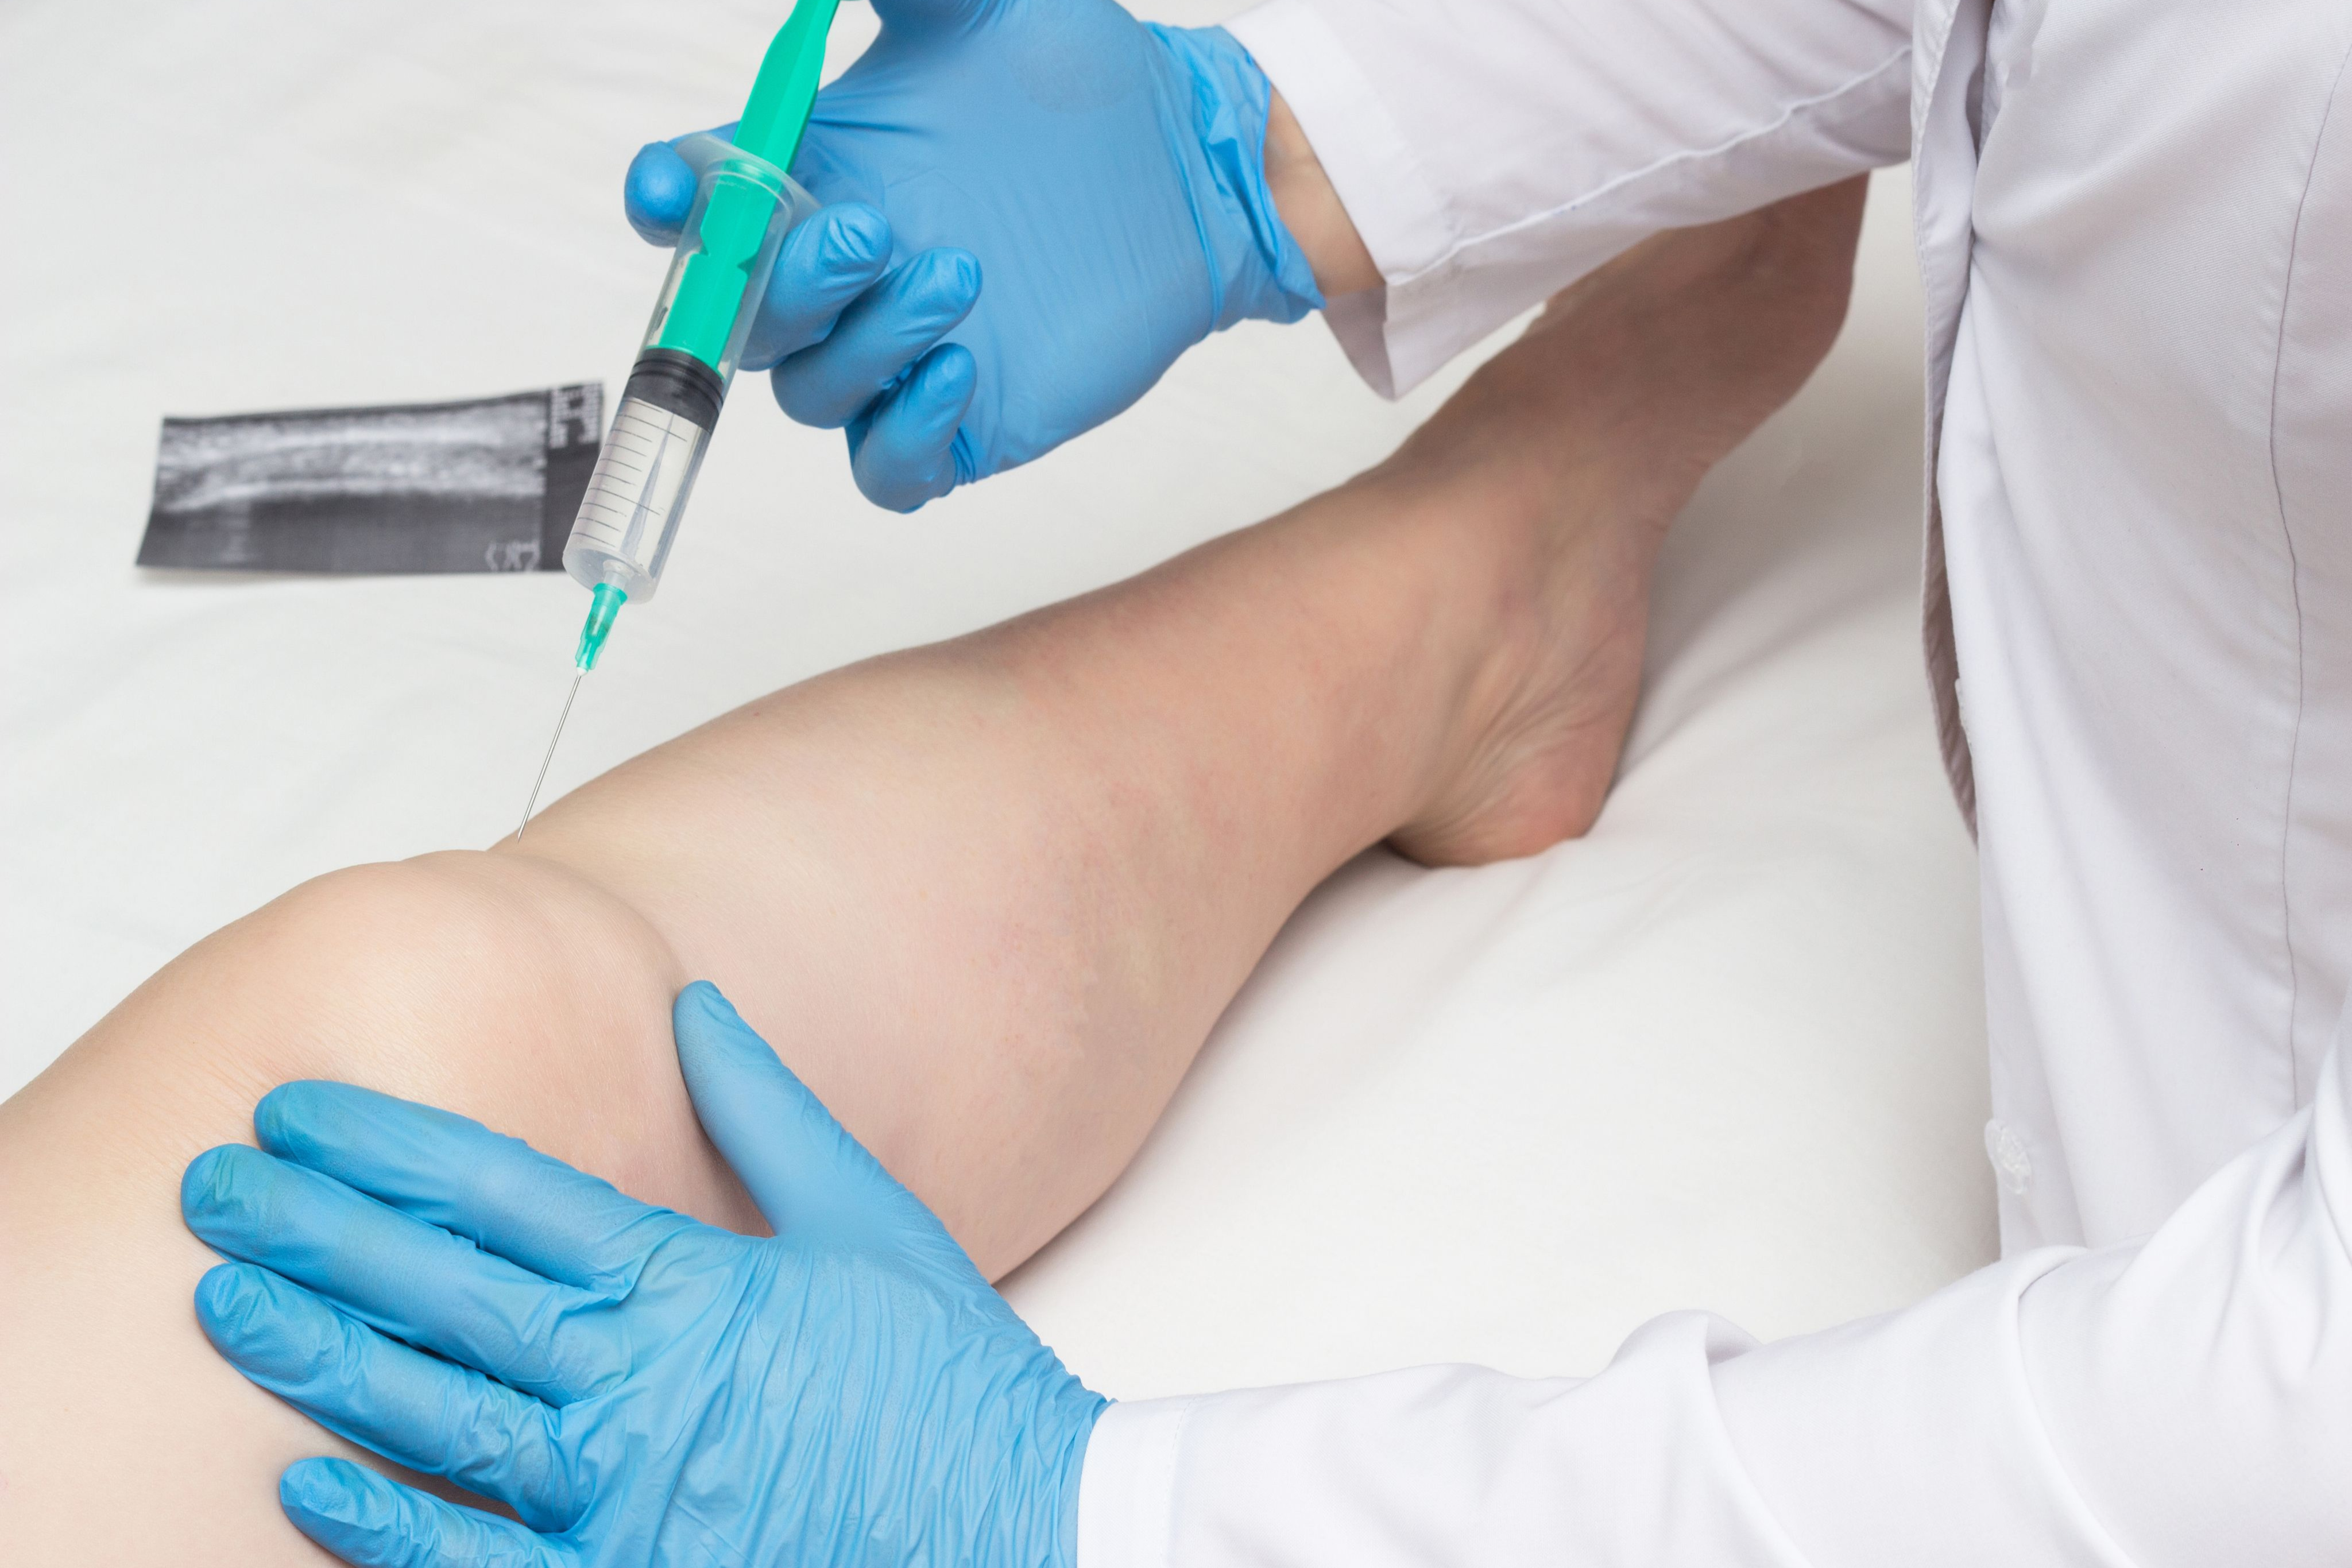 Minimally Invasive Treatment for Varicose Veins Now Available to Patients  at UCSF Radiology